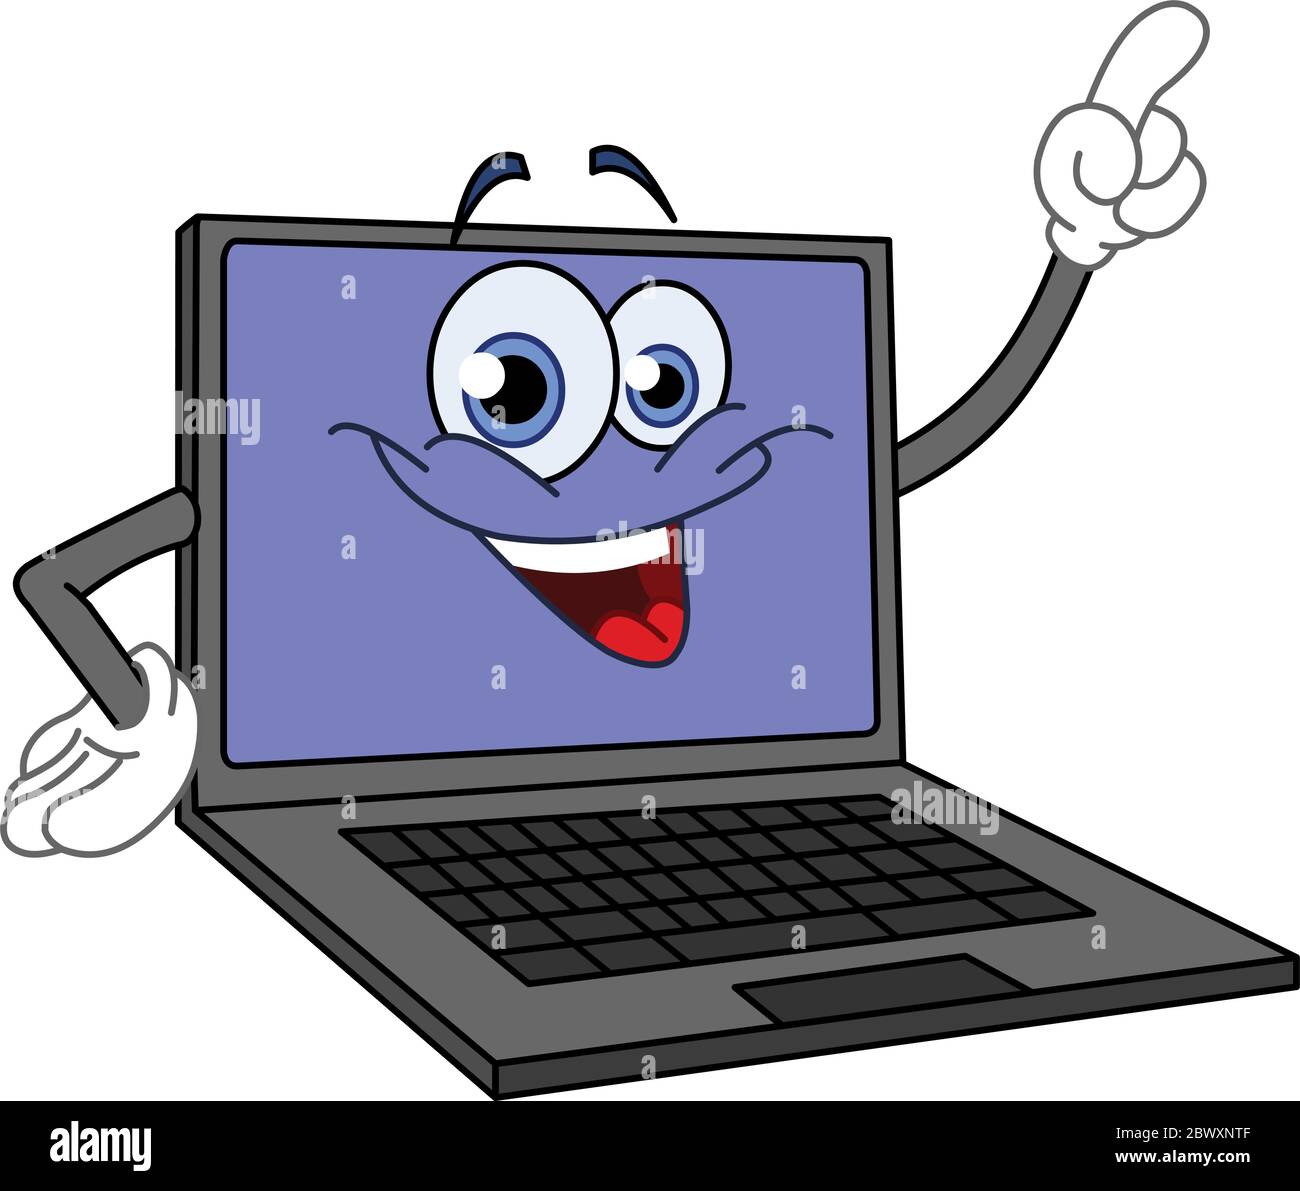 Cartoon computer Cut Out Stock Images & Pictures - Alamy